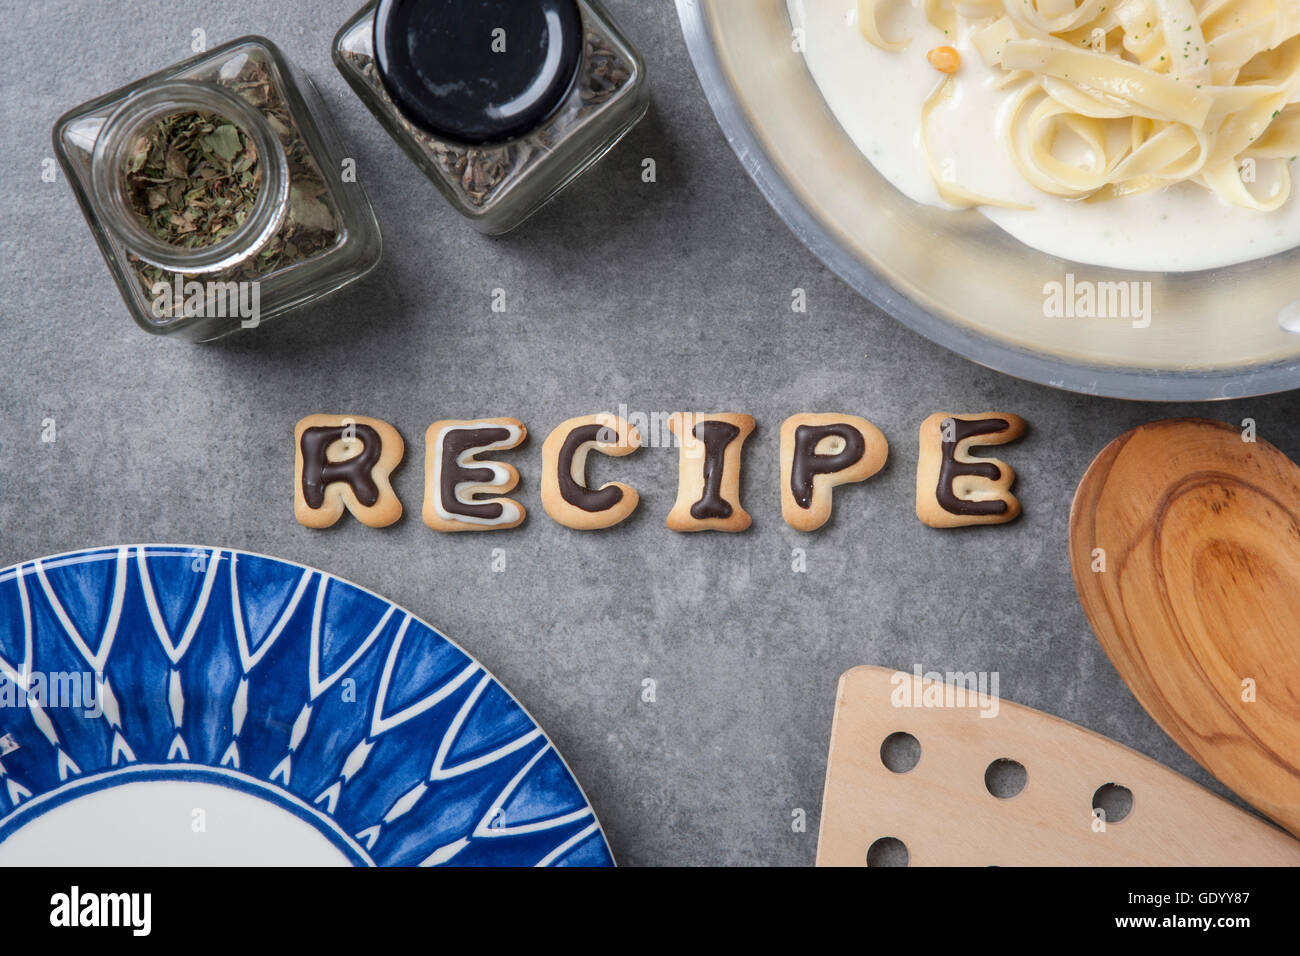 Typographical word of RECIPE made of alphabet cookies with herbs, noodles and plates Stock Photo